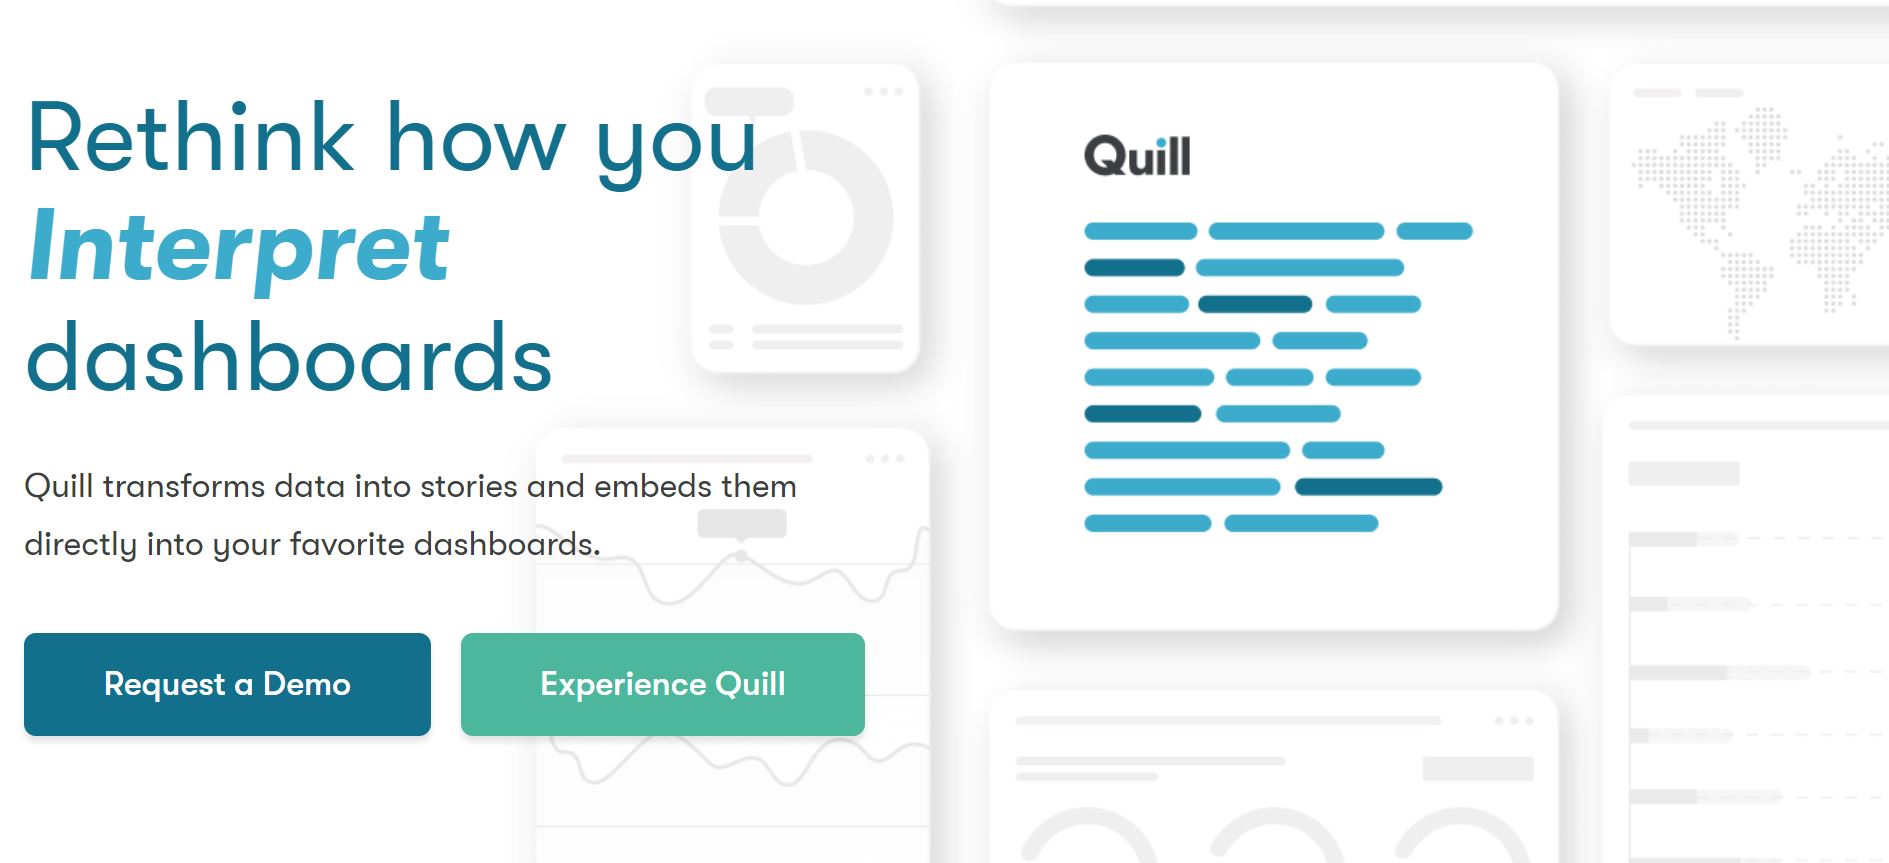 Find detailed information about Quill